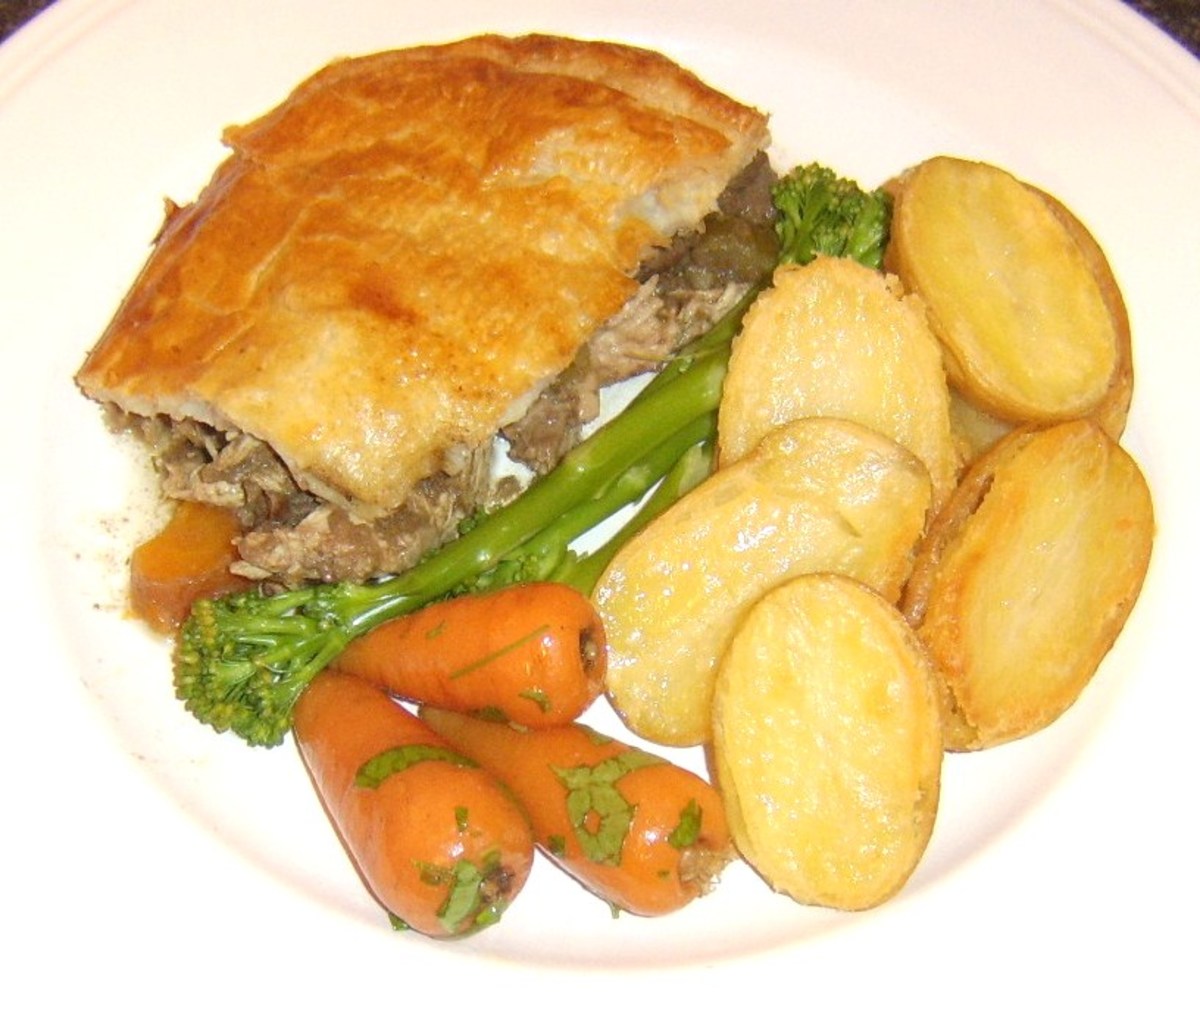 Venison and guinea fowl pie is served with pan roasted potatoes, carrots and tenderstem broccoli